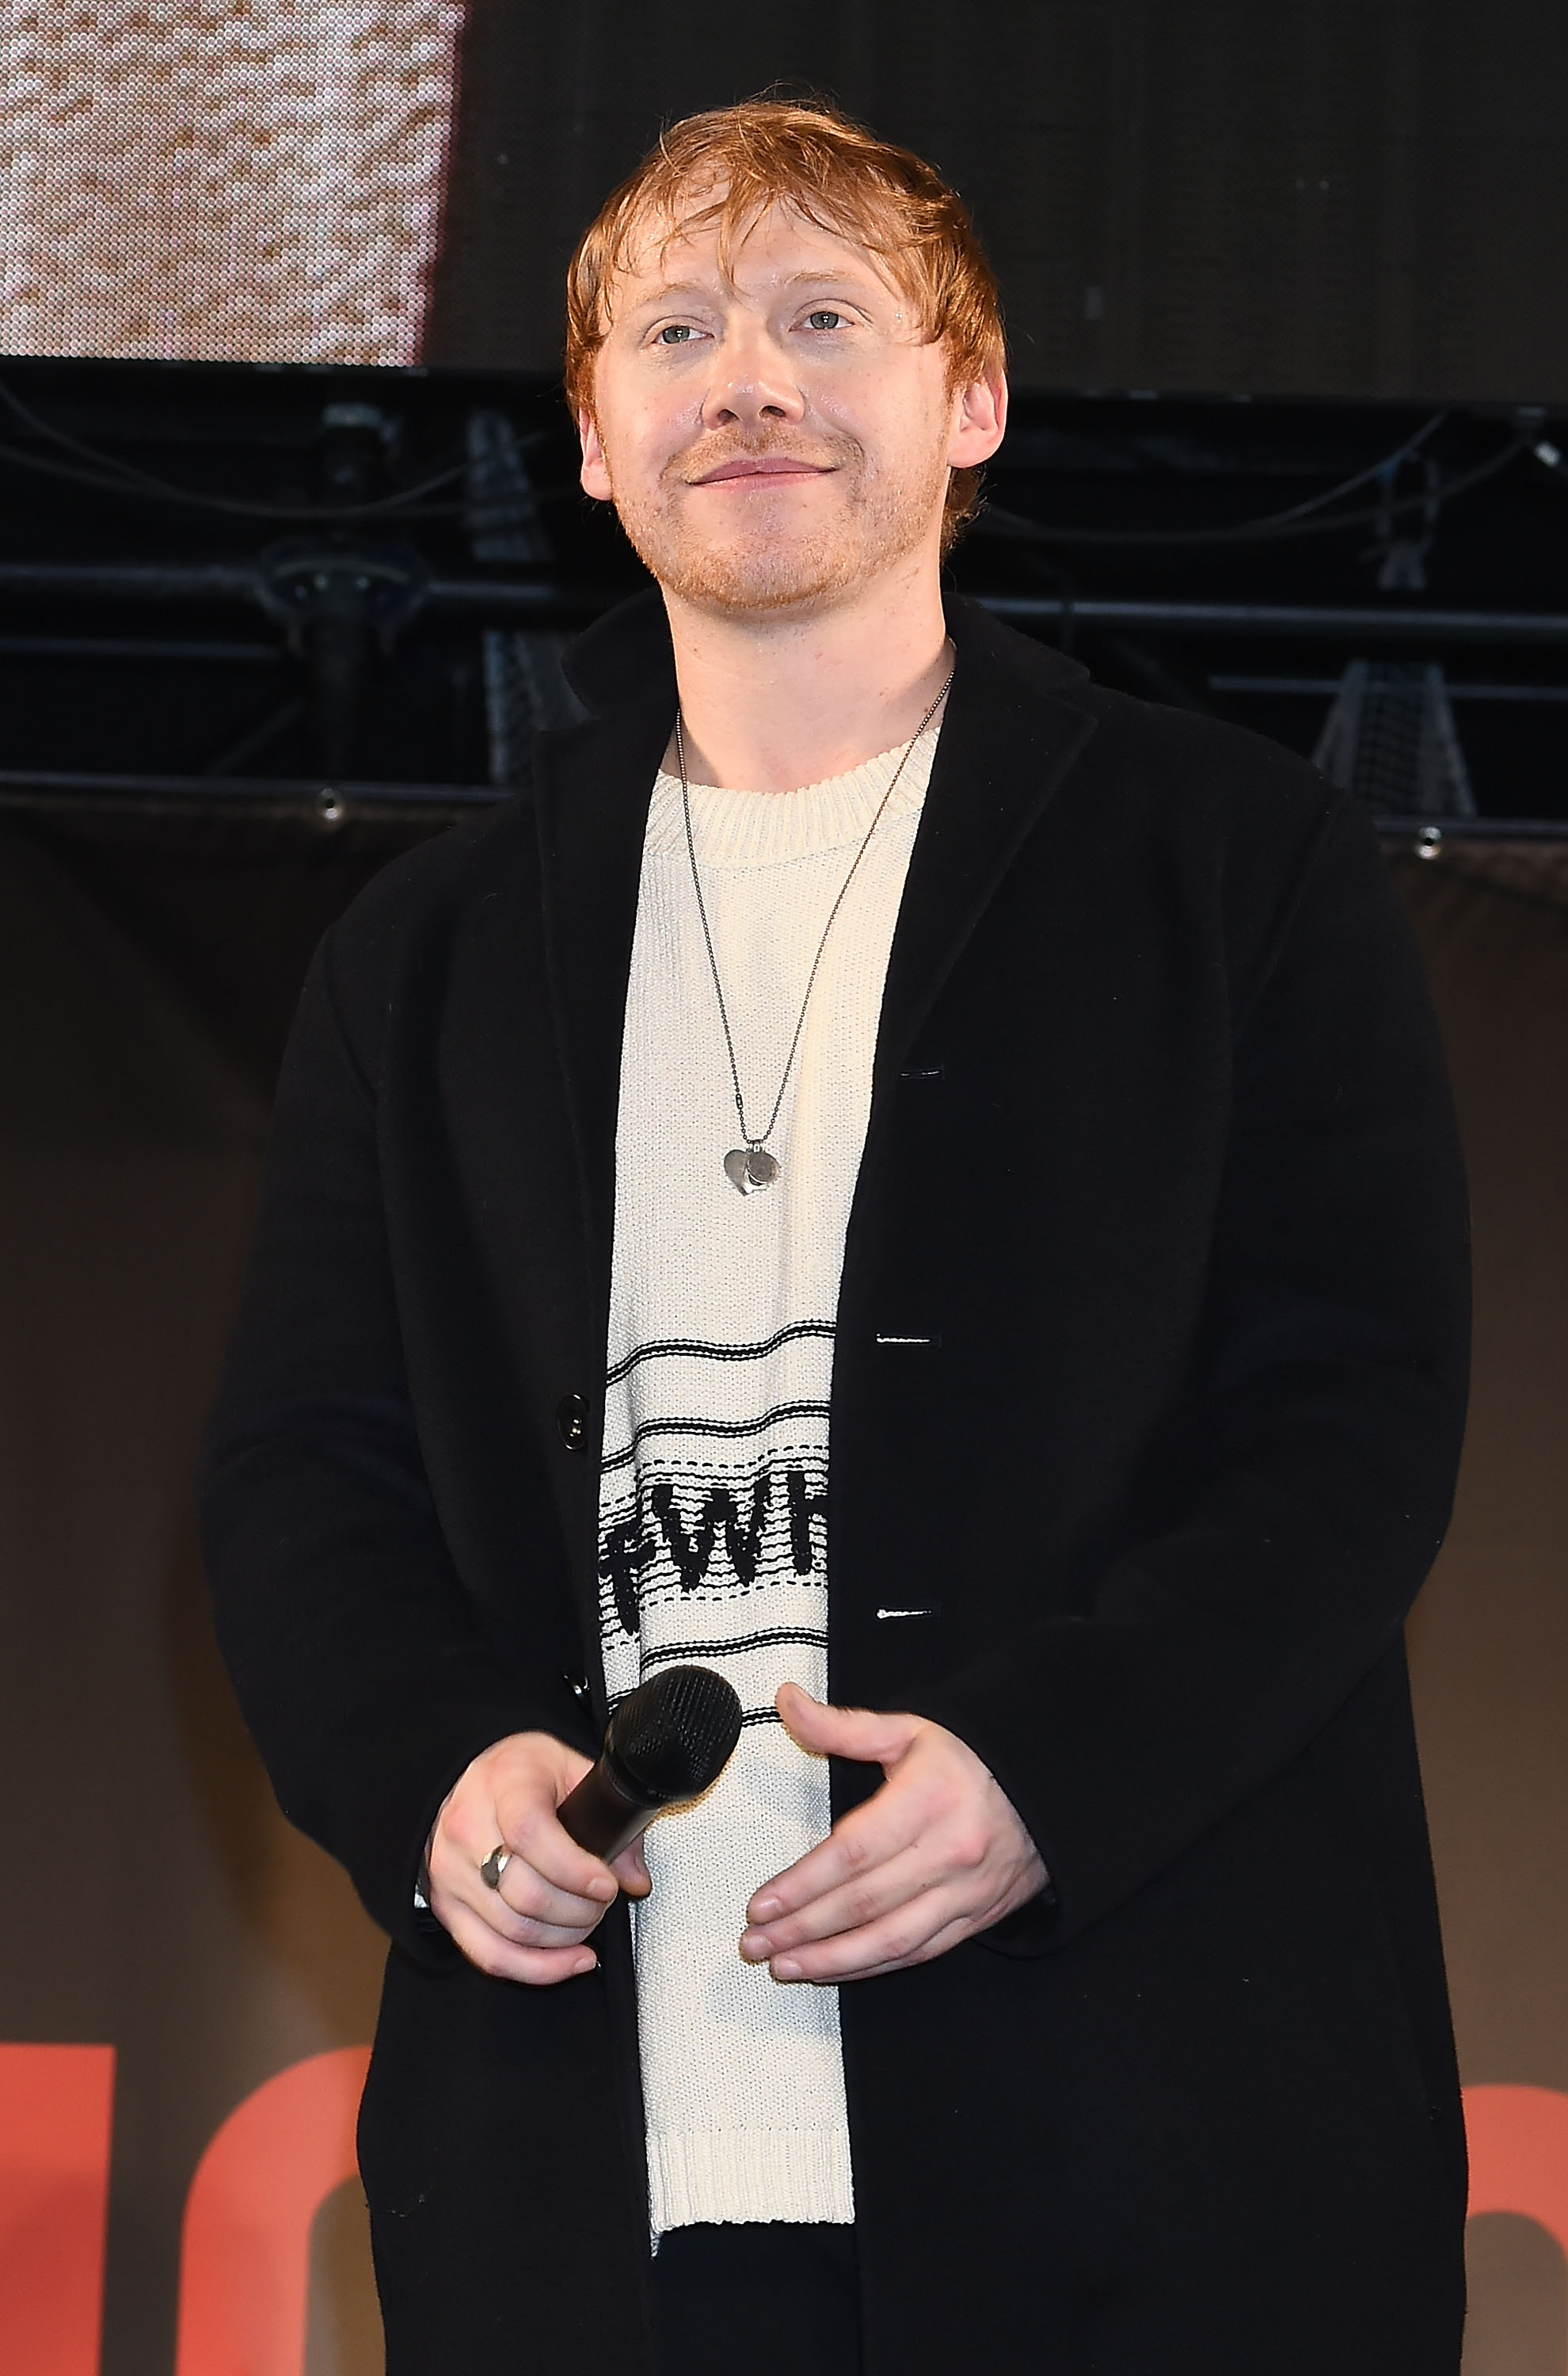 Rupert Grint at the Tokyo Comic Con in Chiba, Japan on November 24, 2019 | Source: Getty Images